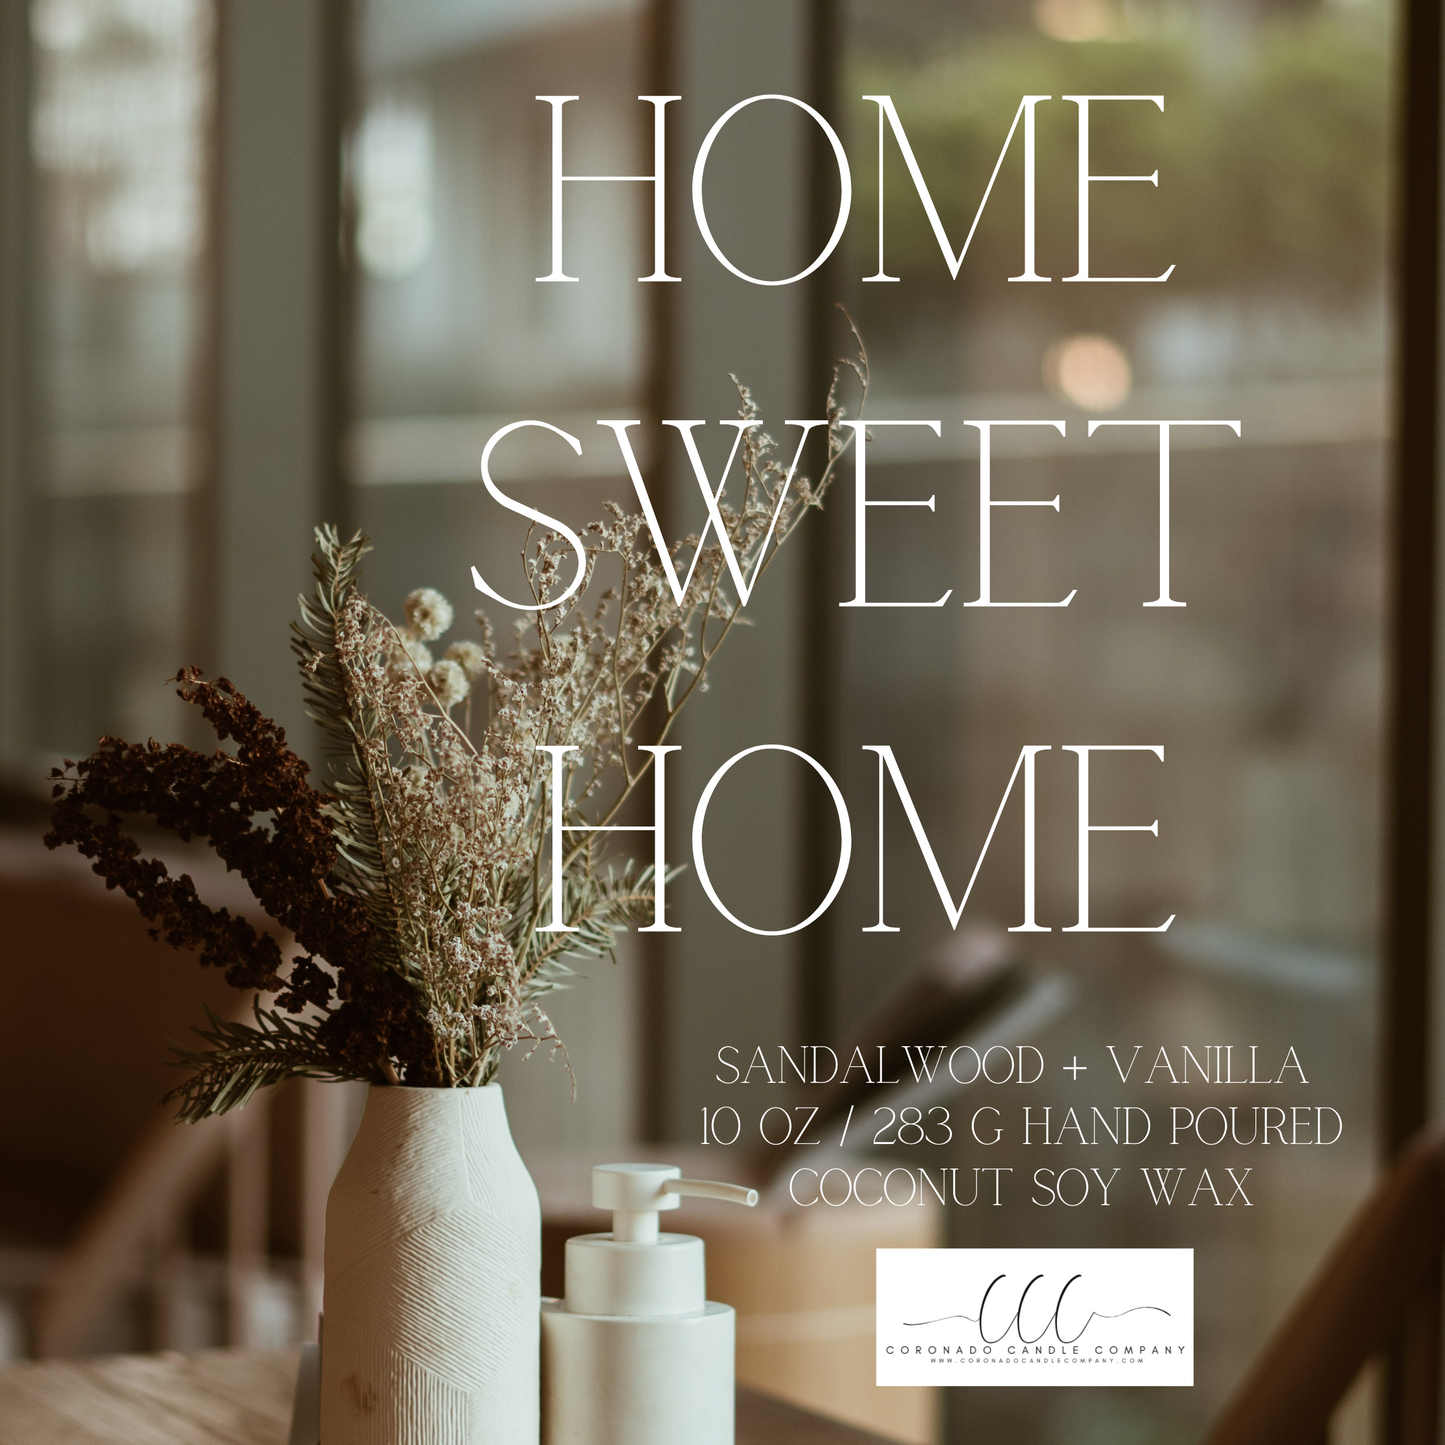 Home sweet Home candle